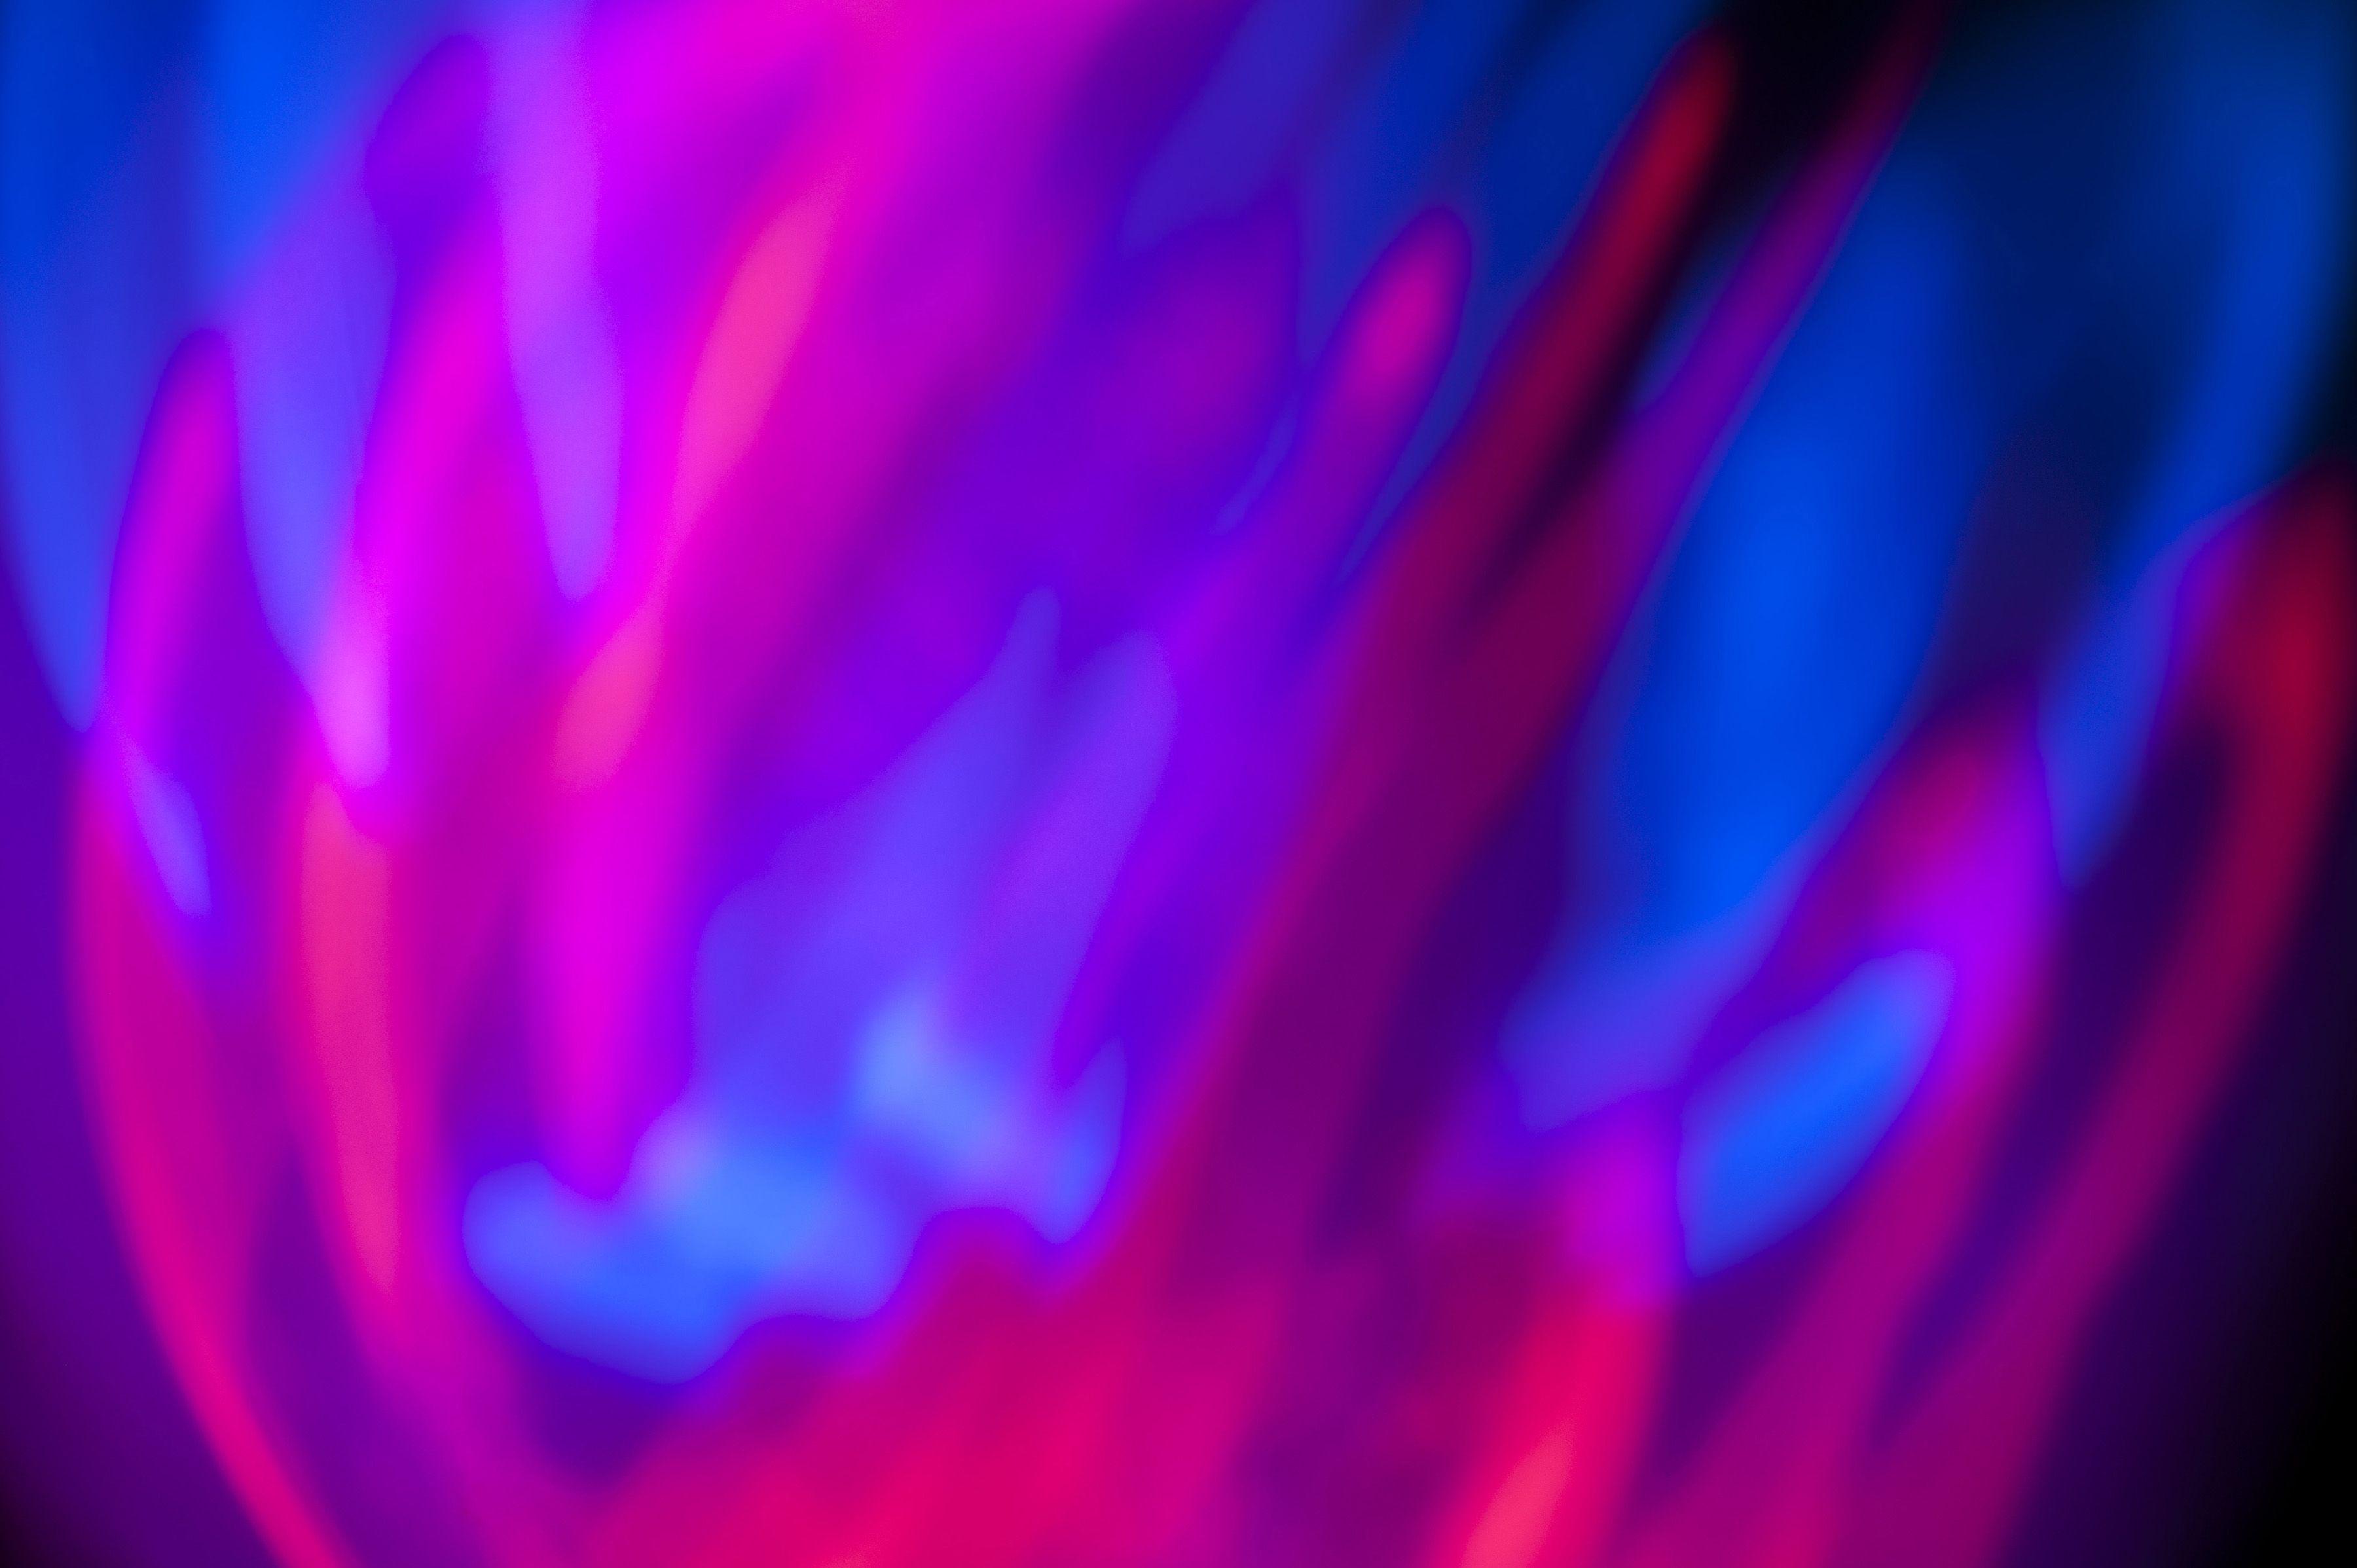 Red Blue Abstract Backgrounds - Wallpaper Cave